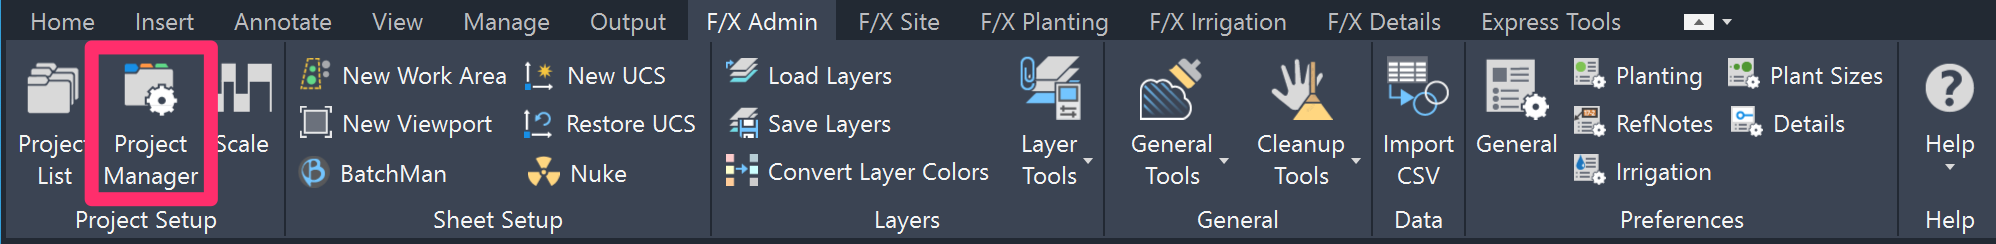 F/X Admin ribbon, Project Manager button